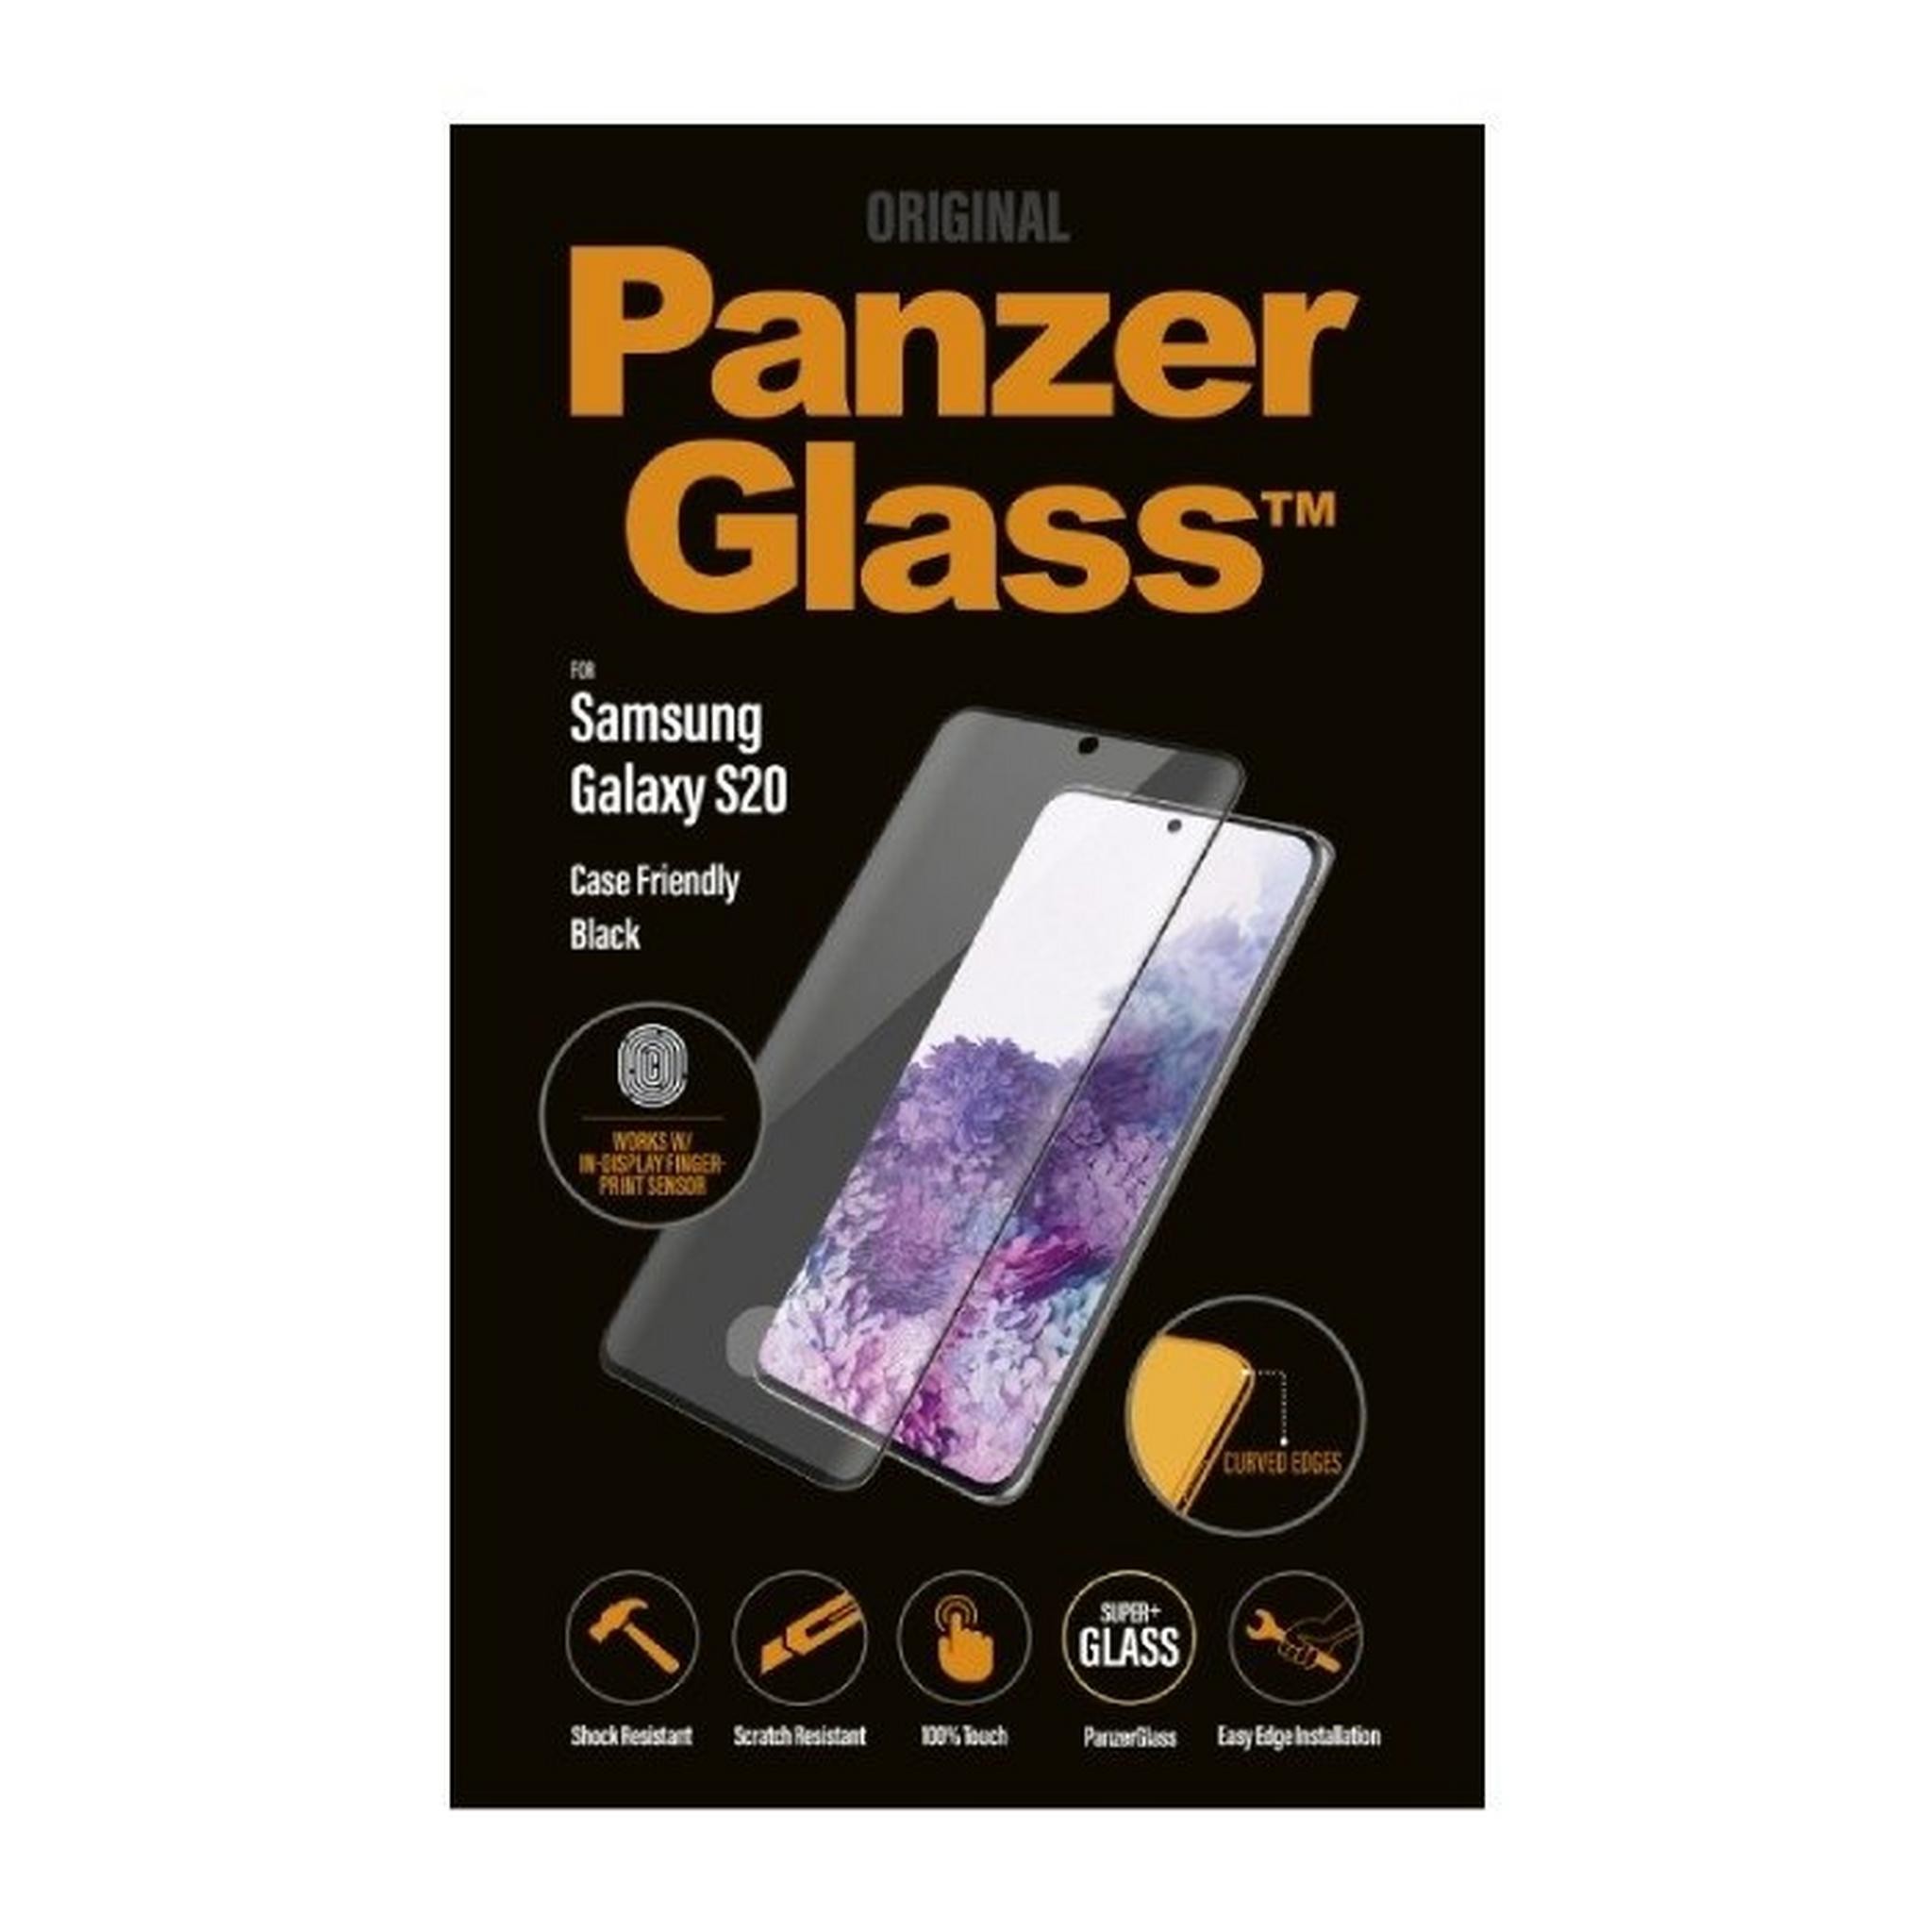 Panzer Samsung Galaxy S20 Tempered Glass Screen Protector - Black